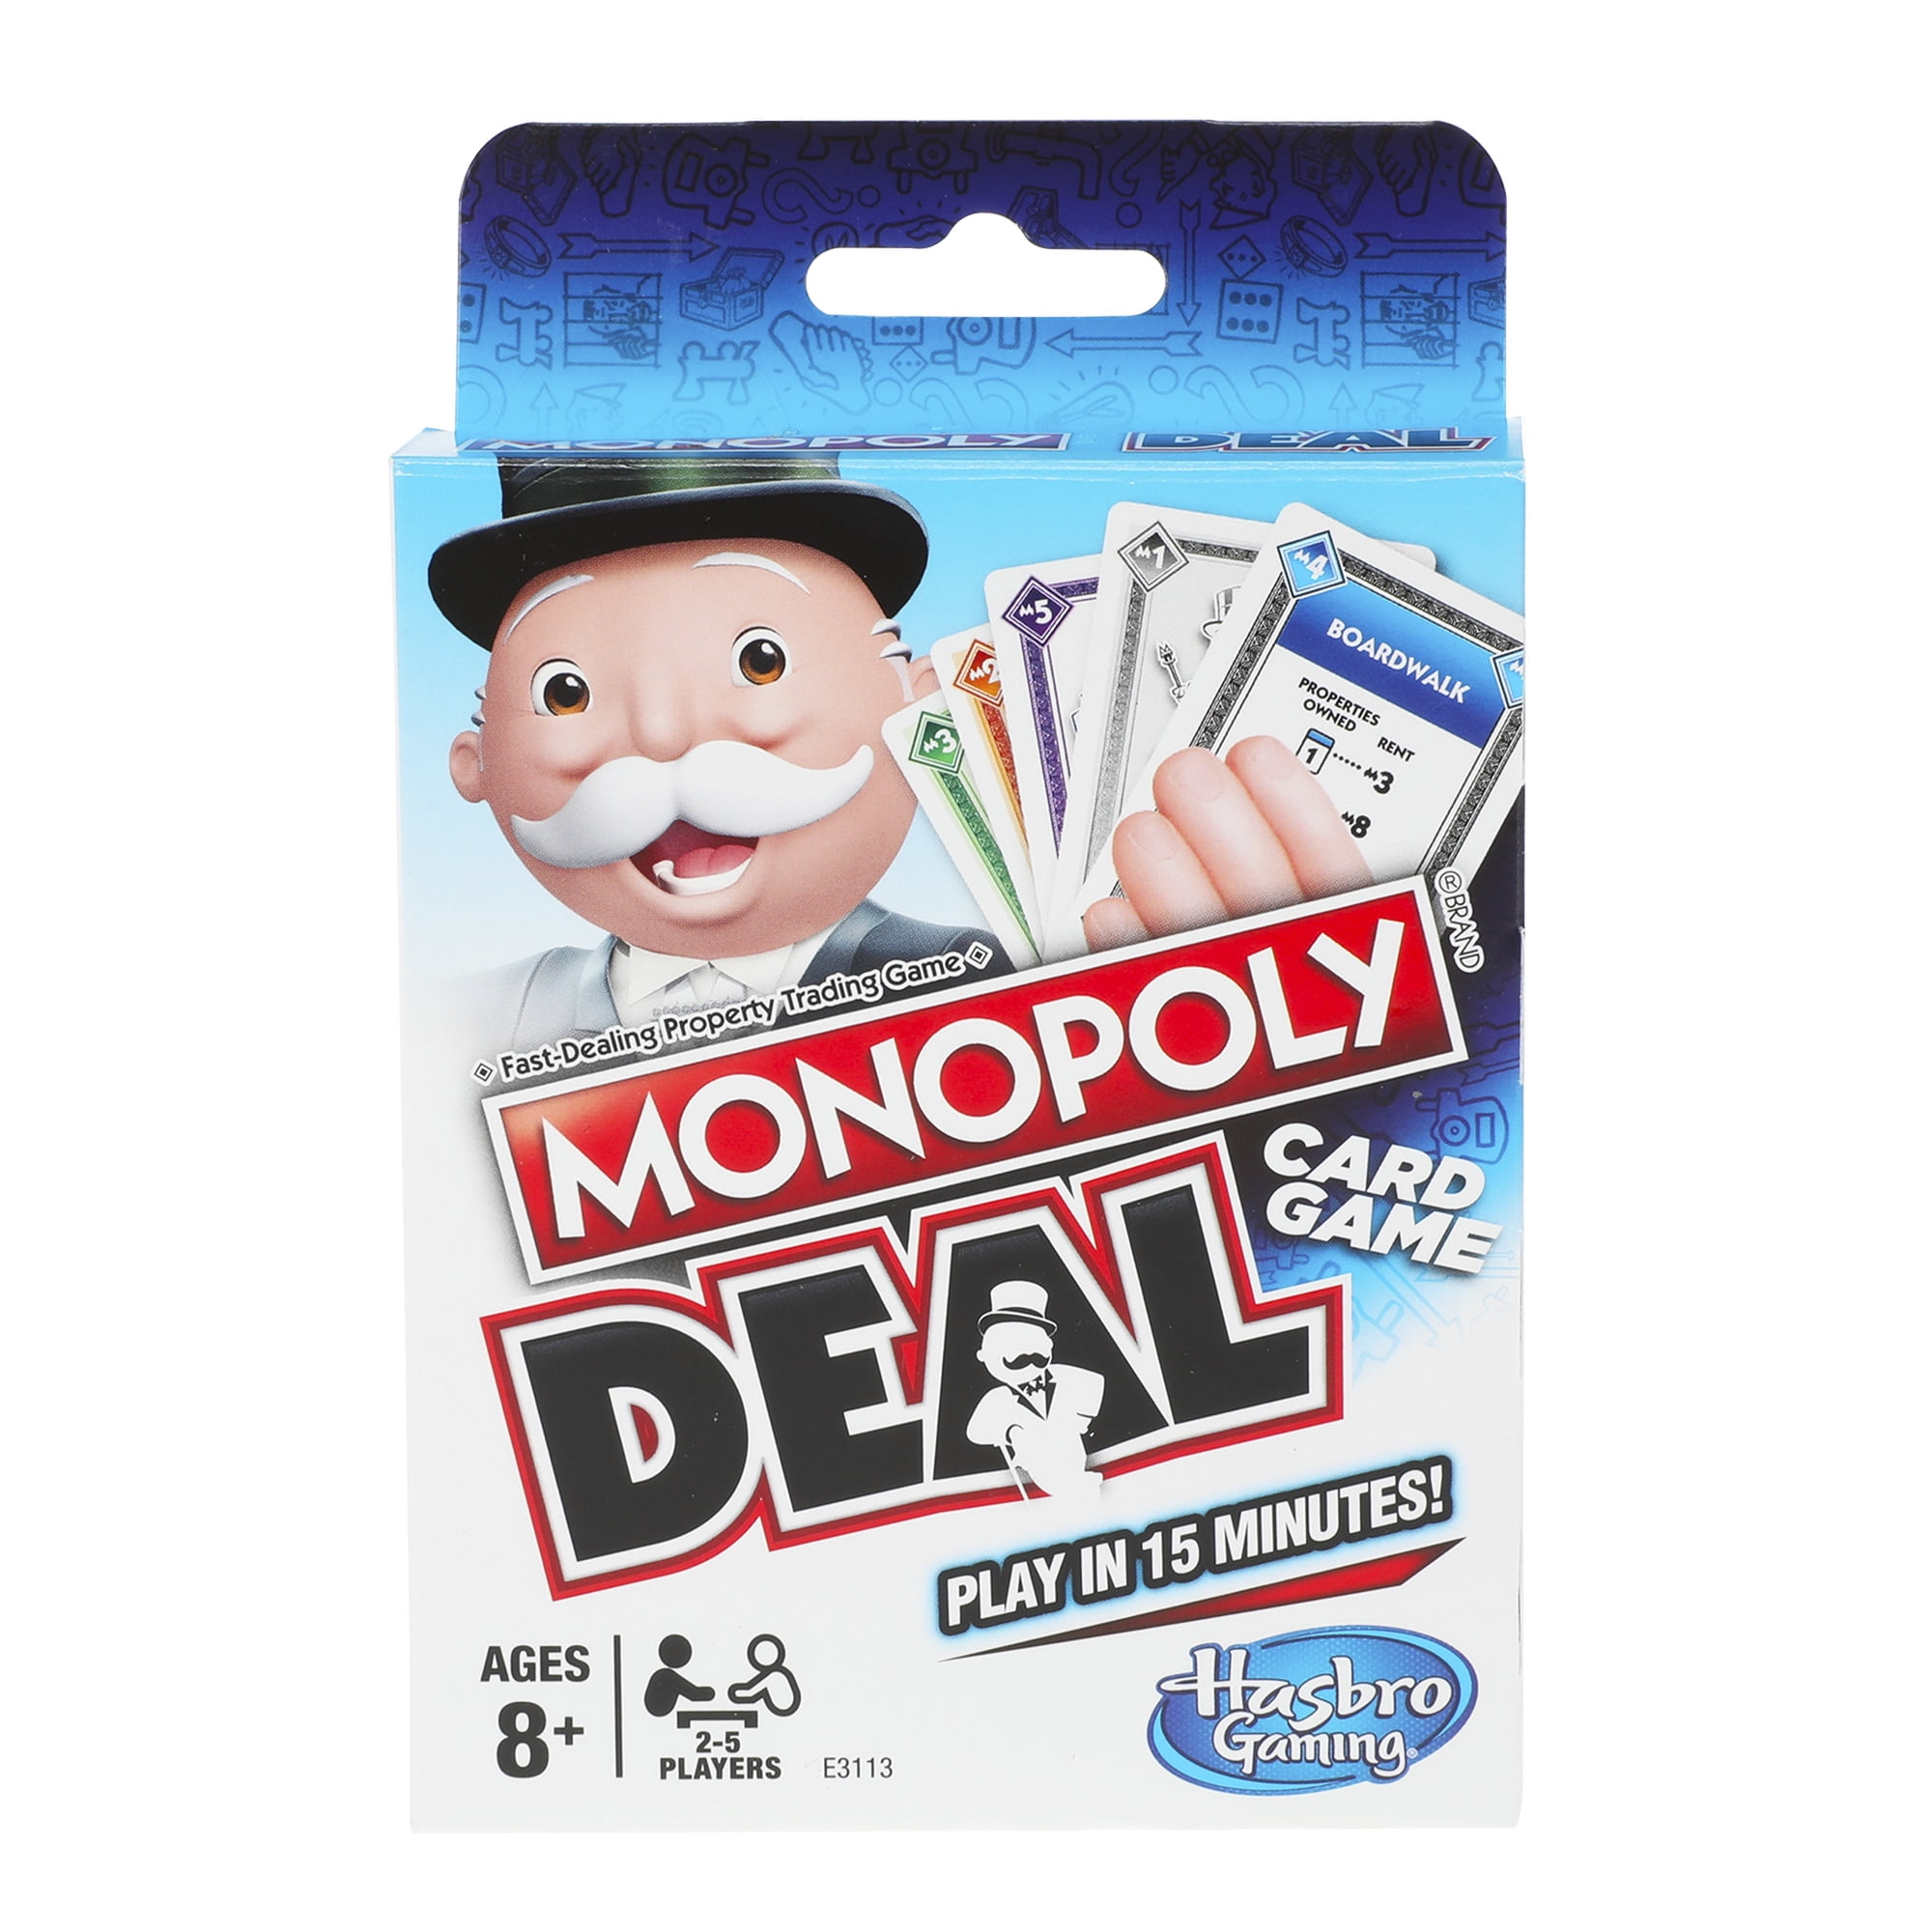 Family Game Monopoly Deal Card Game Funskool 2-5 Players Indoor Game Kids Age 8+ 